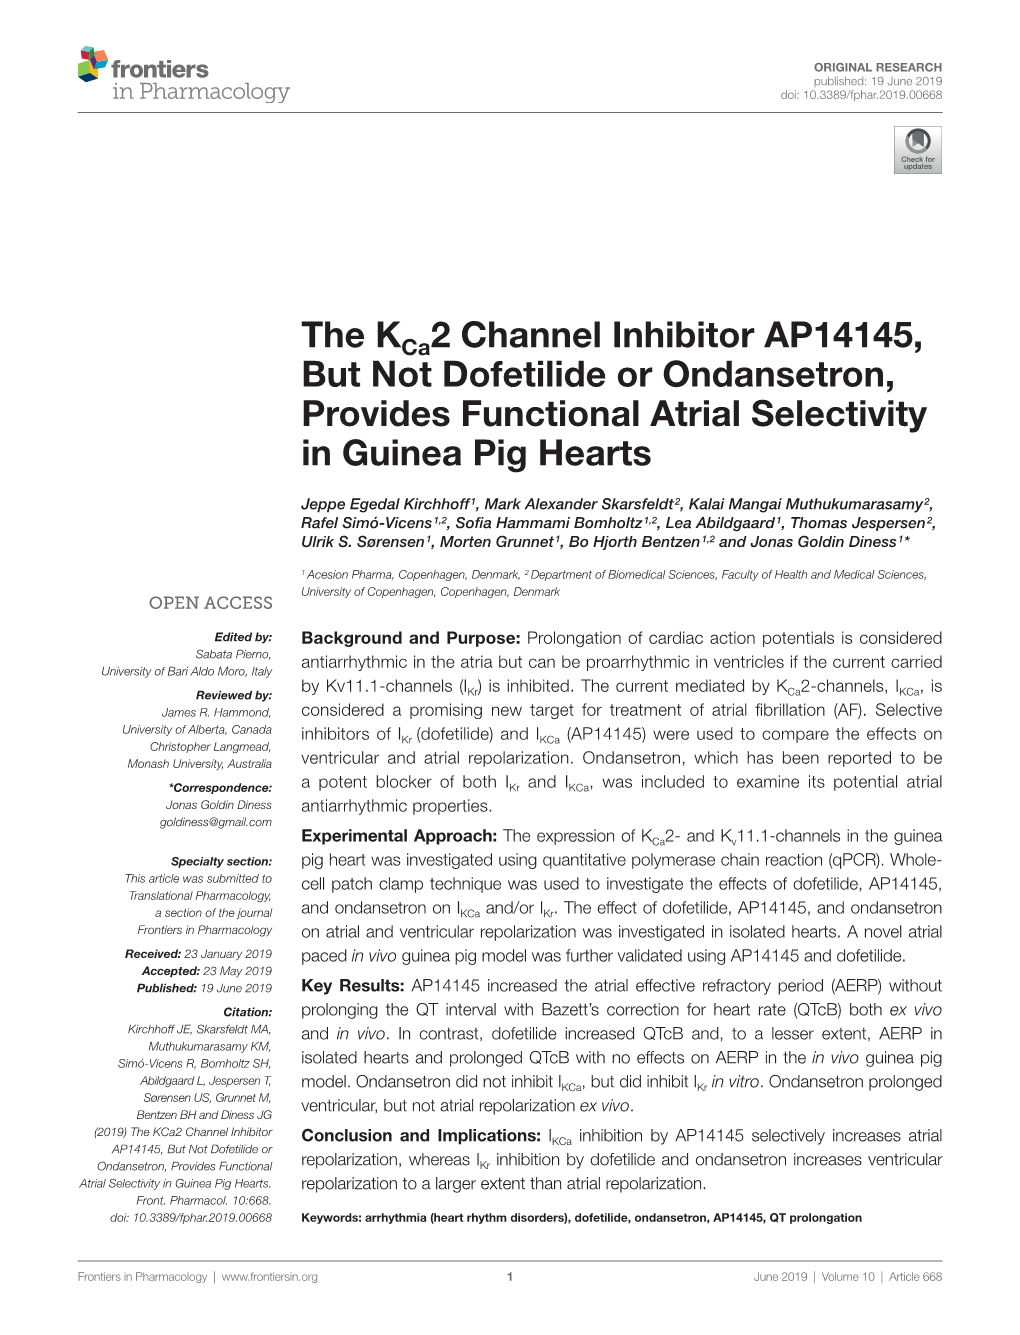 The Kca2 Channel Inhibitor AP14145, but Not Dofetilide Or Ondansetron, Provides Functional Atrial Selectivity in Guinea Pig Hearts